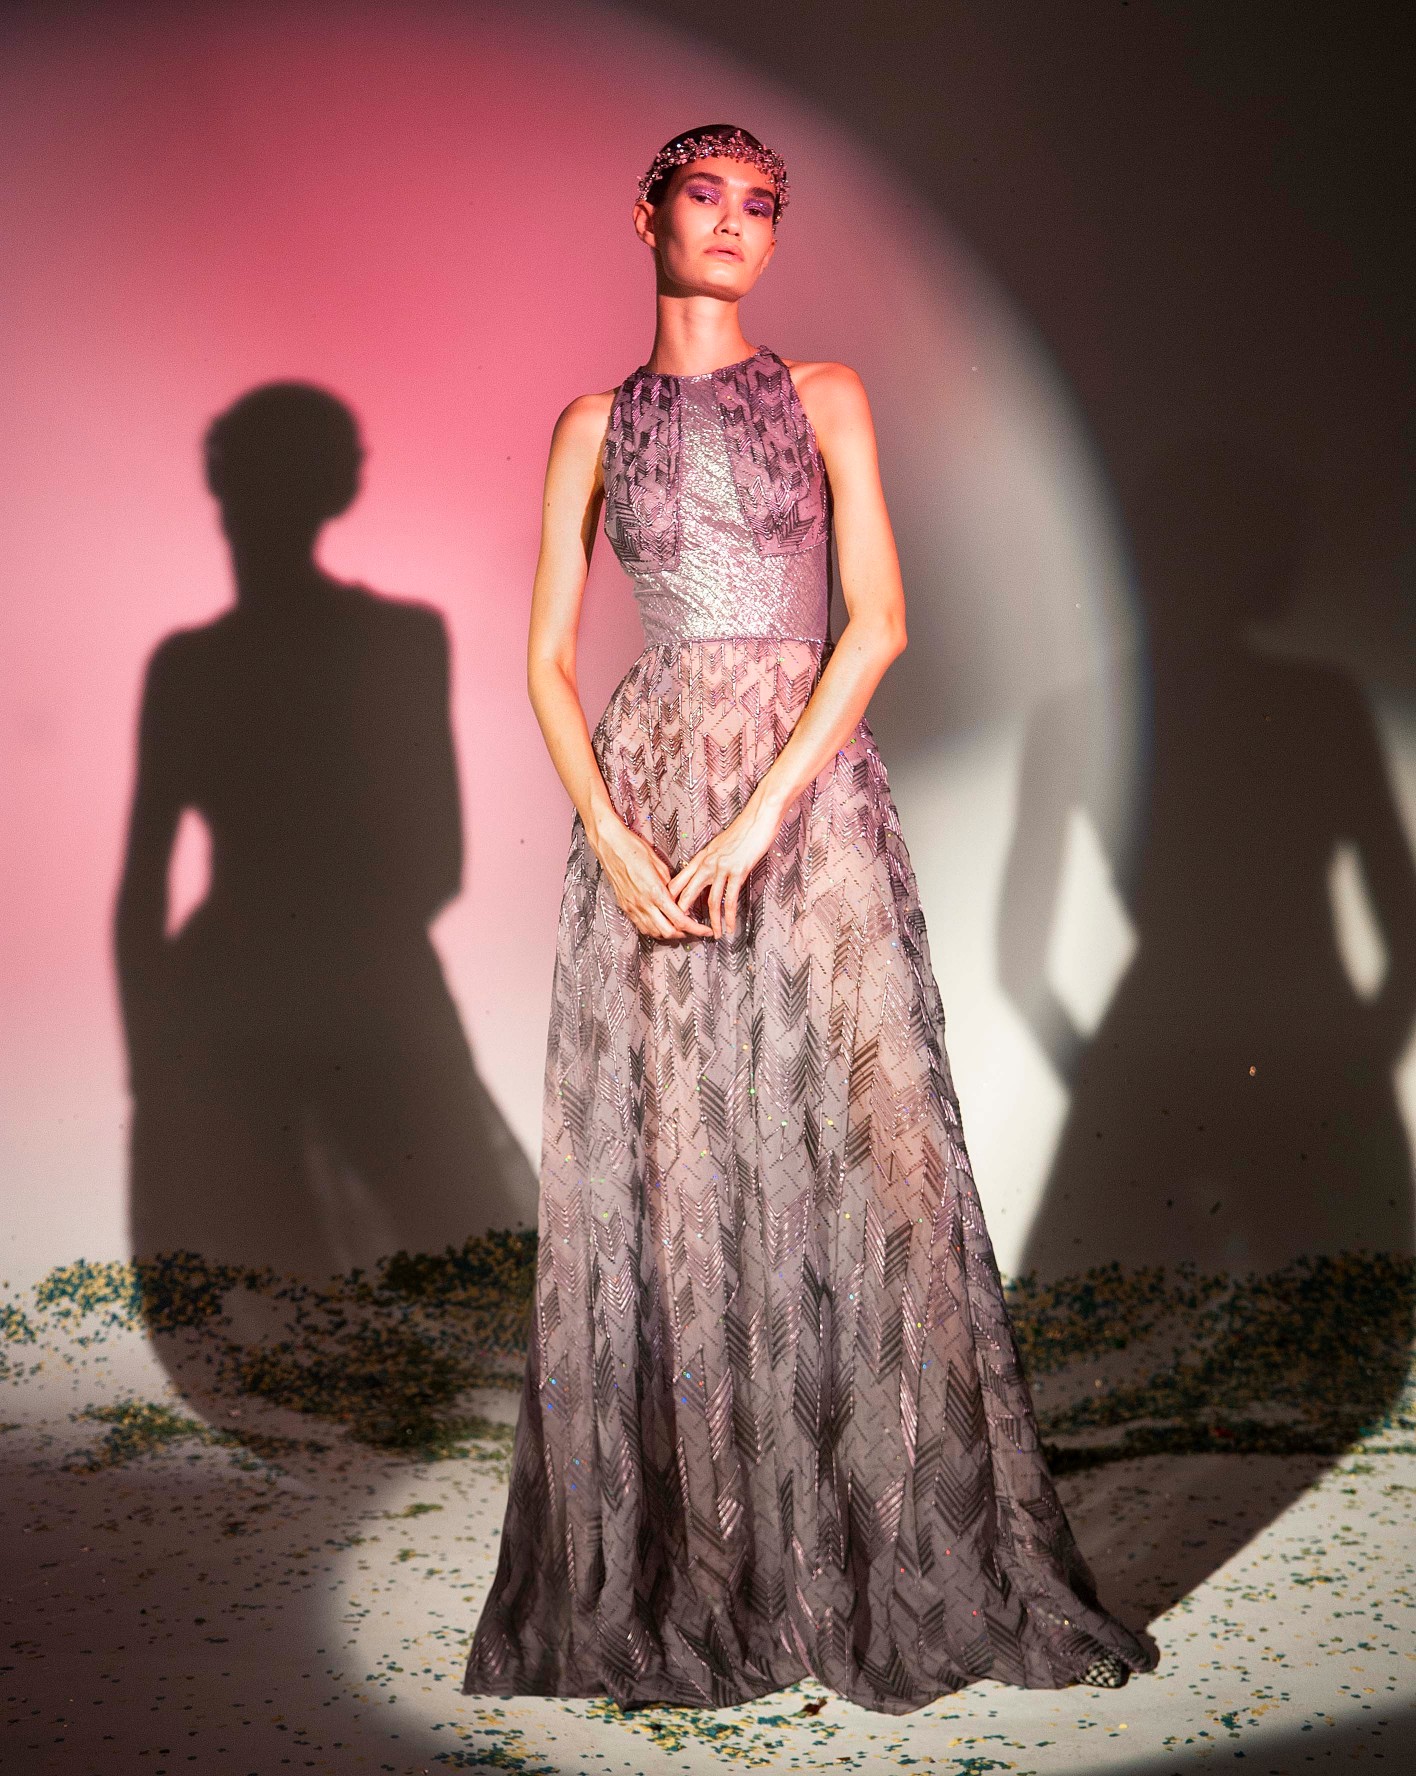 FW19-15 Lilac Silk Chiffon Gown Embellished With Silicone Plaids And Holographic Sequins .jpg